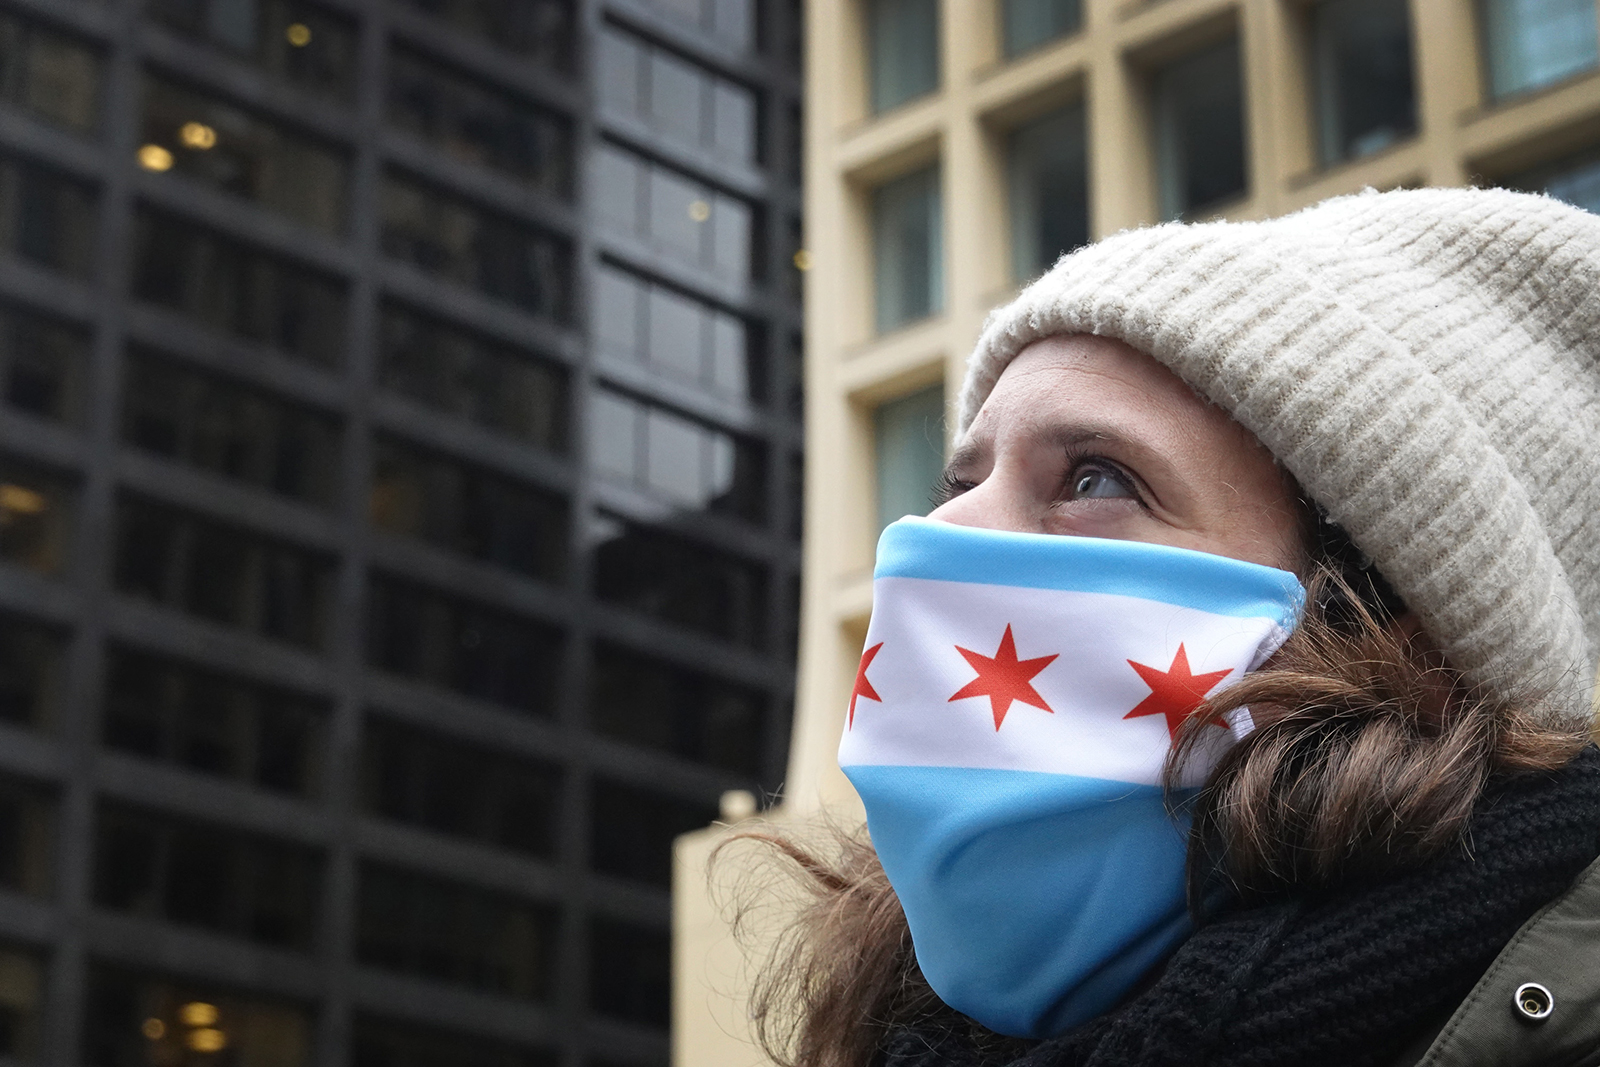 Lydia Ross, director of public art for the city of Chicago, watches as a mask with a depiction of the Chicago flag is placed on the Picasso statue in Daley Plaza on April 30, in Chicago.